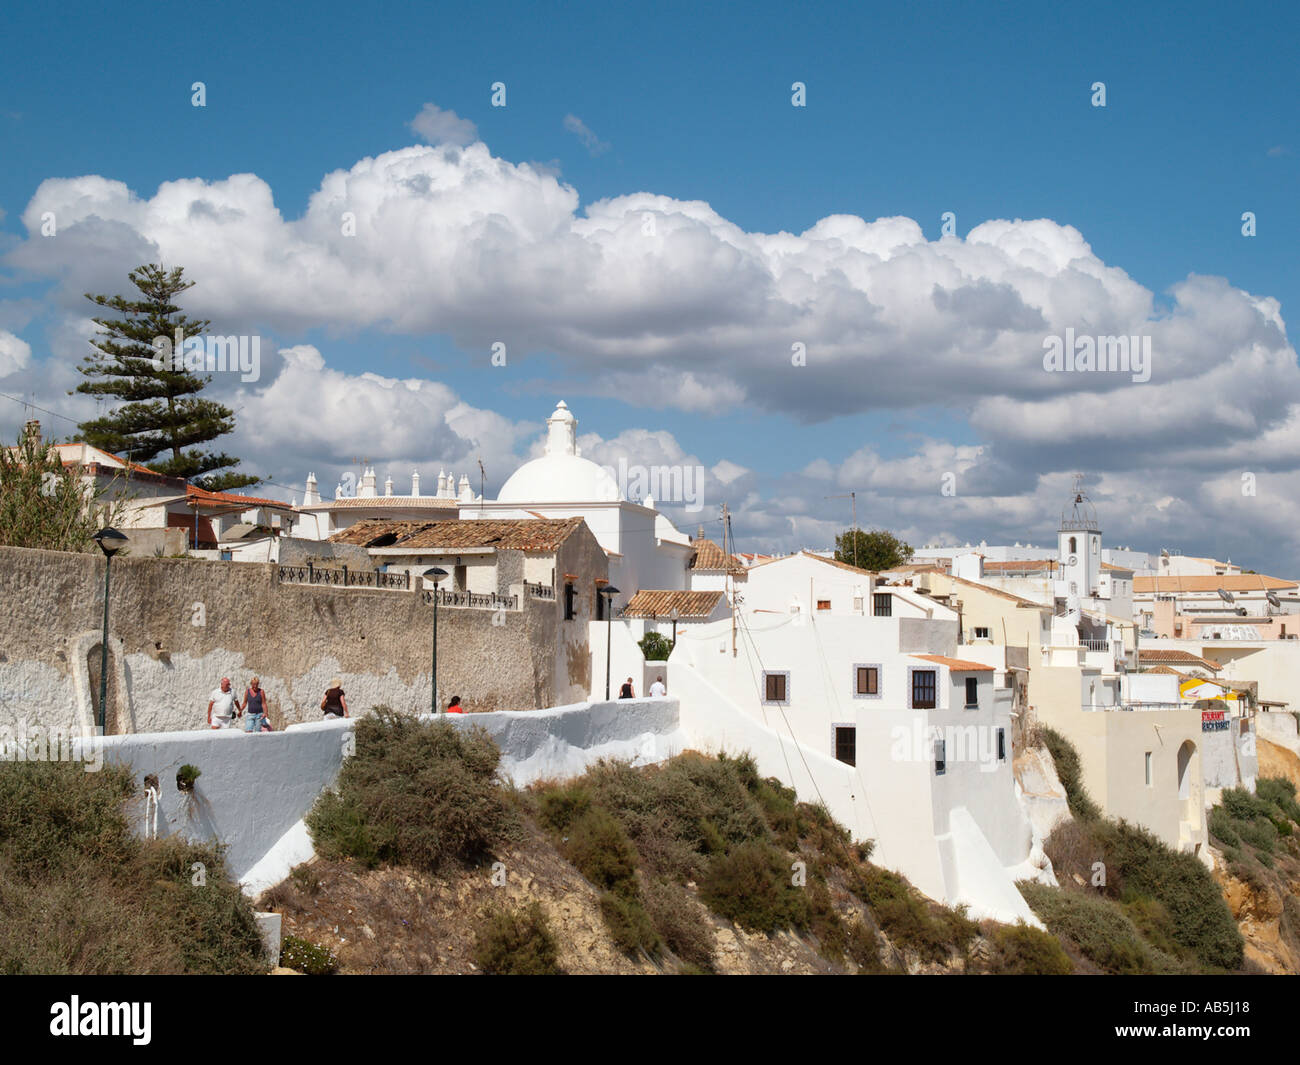 WHITE BUILDINGS of the OLD TOWN and walkway on the cliff Albufeira Algarve Portugal Europe Stock Photo